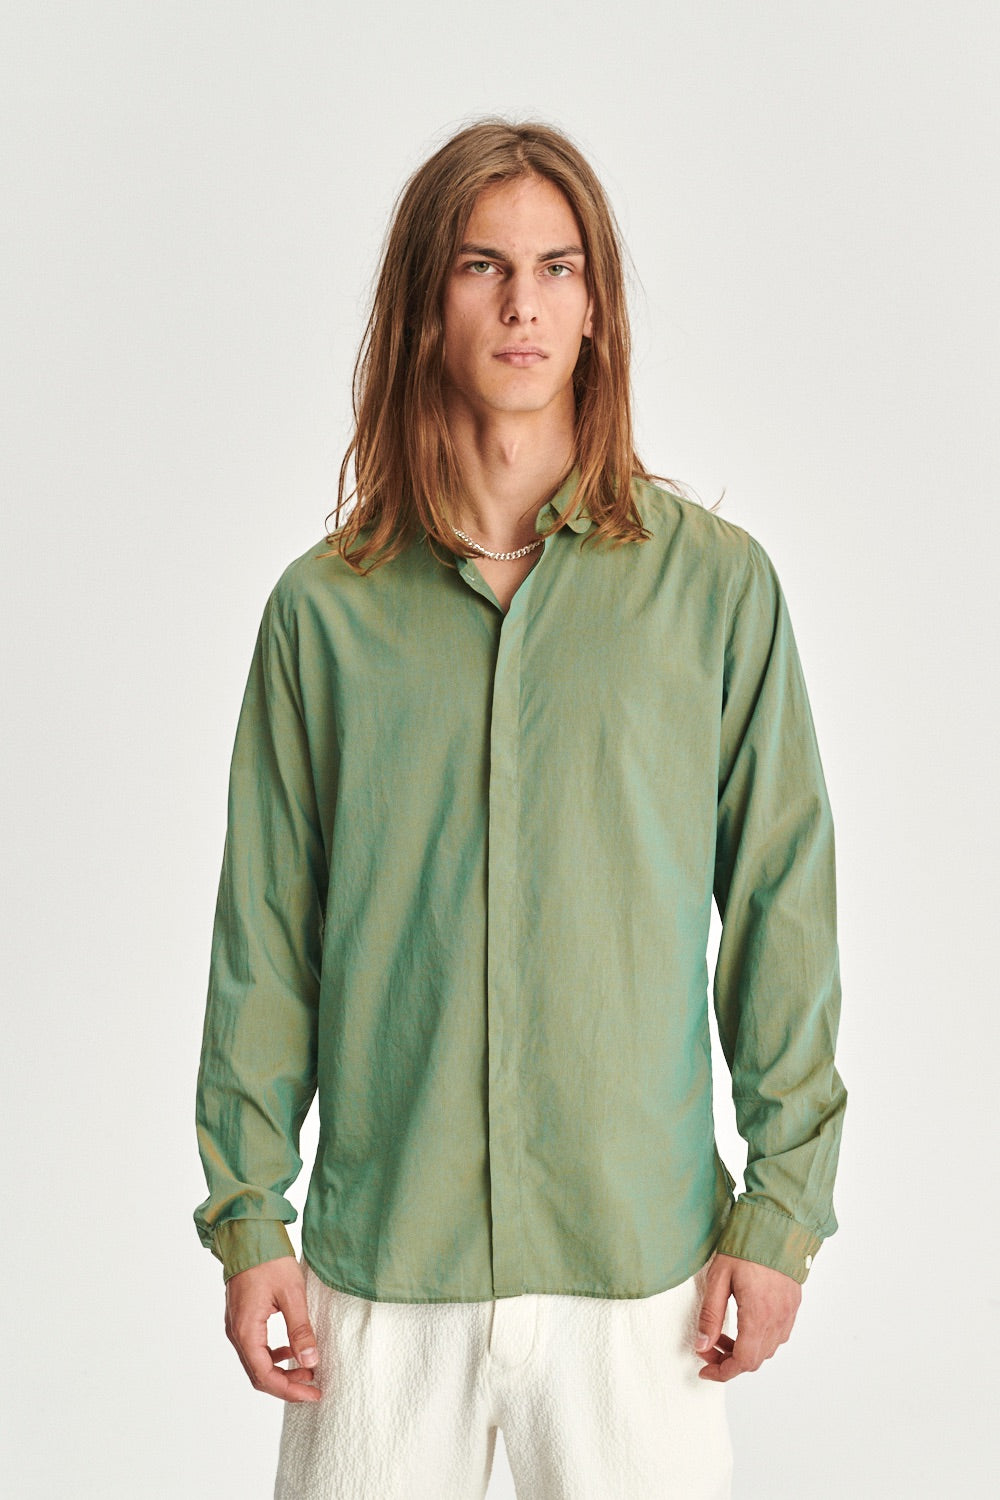 Cute Round Collar Shirt in a Changeable Green Fine Italian Cotton by Albini